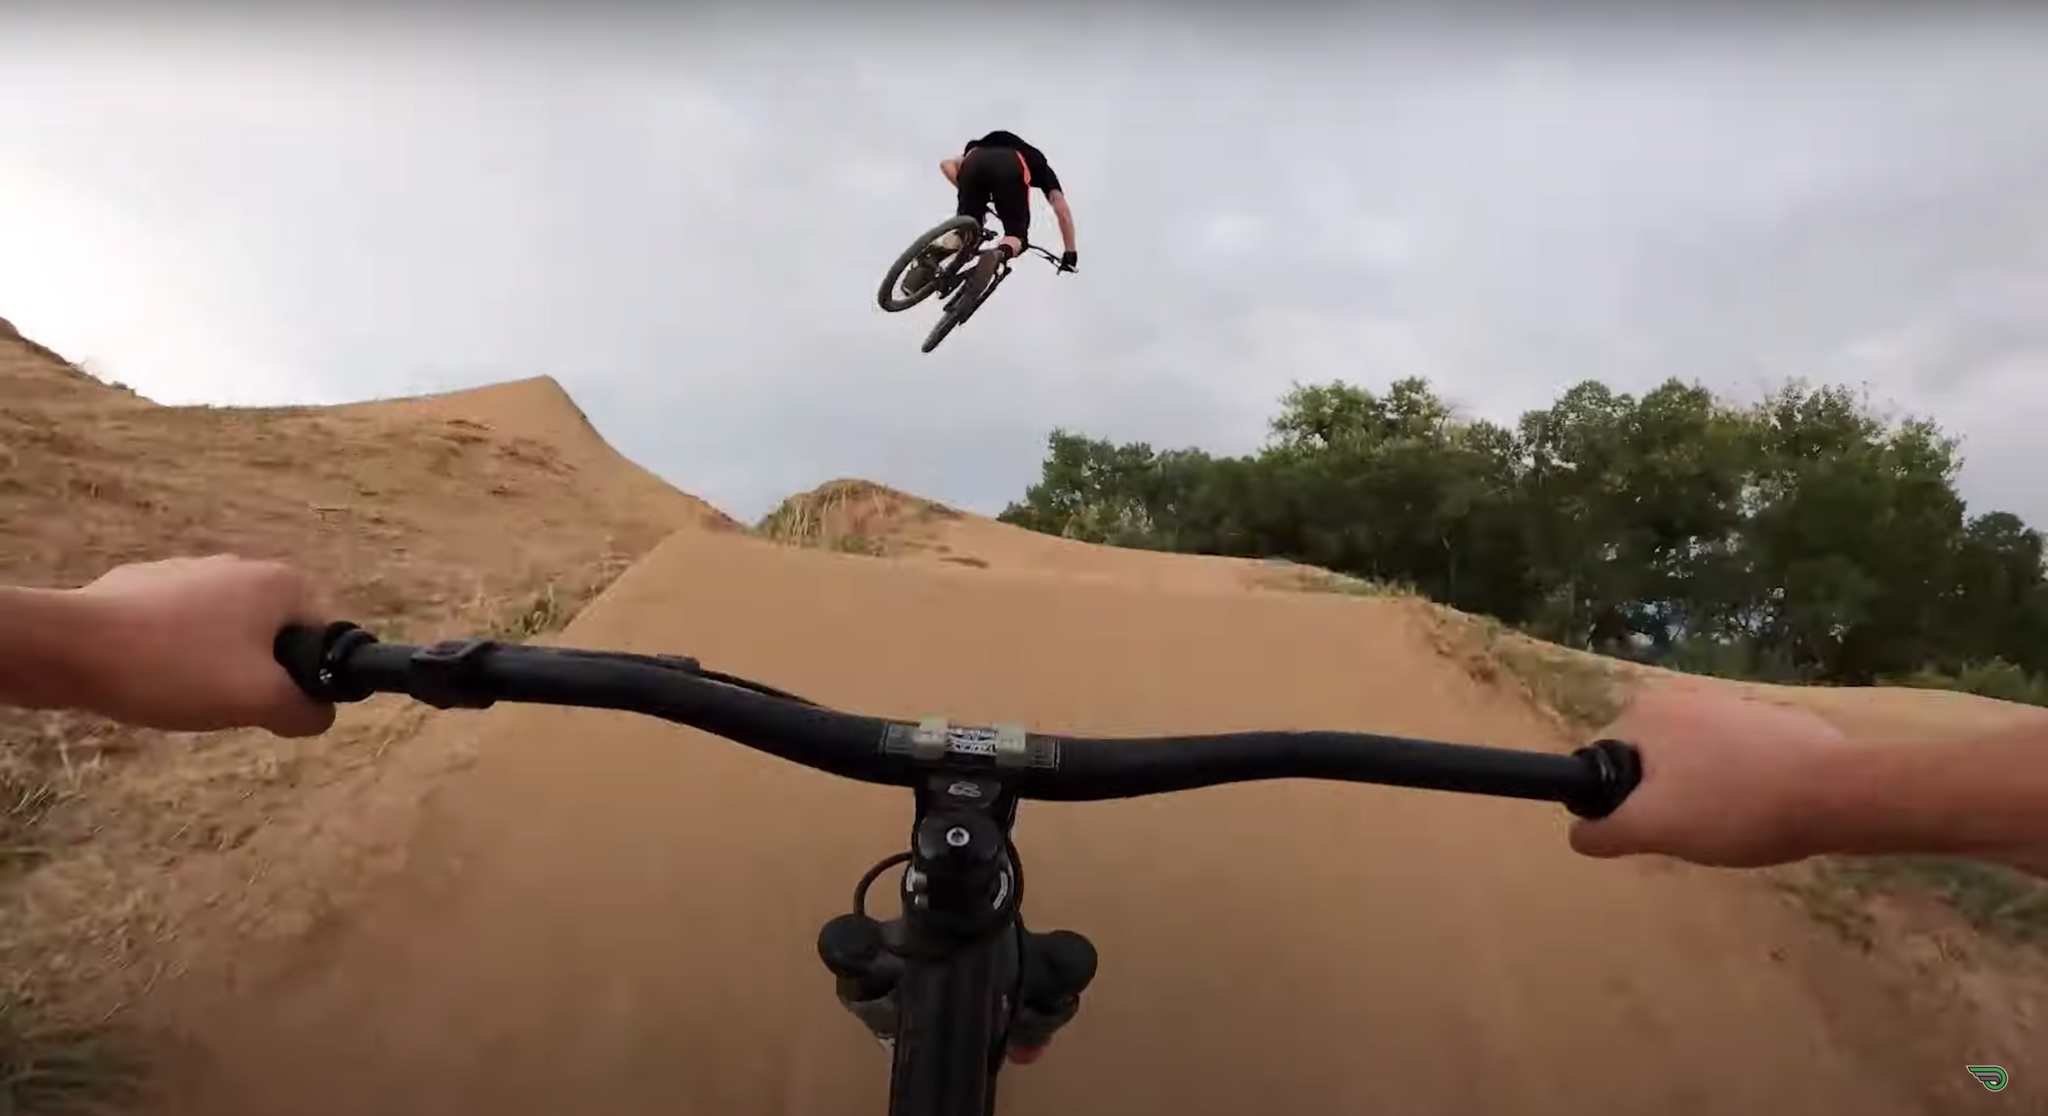 Dirt jumping tips from a DH world champion